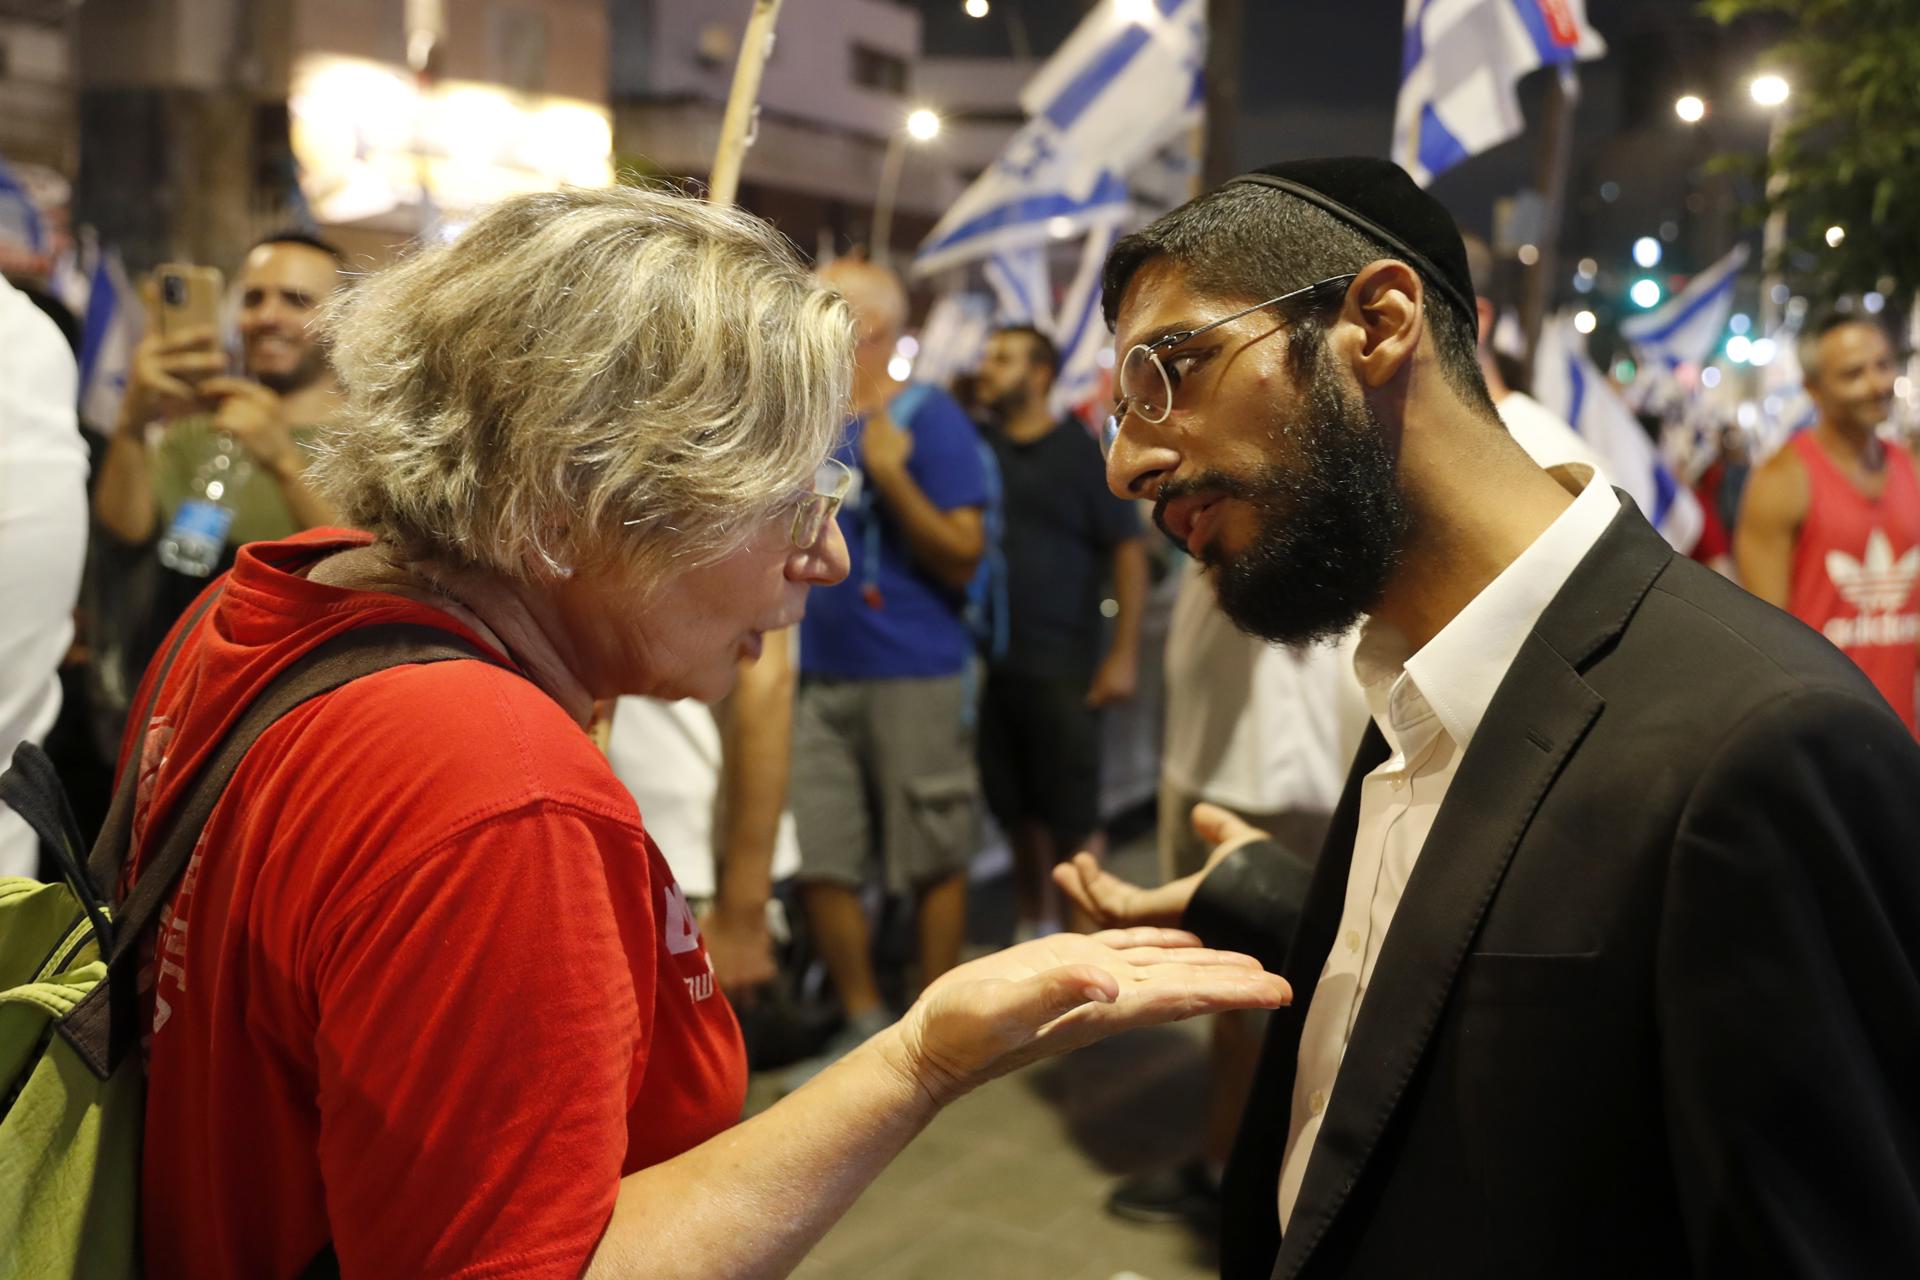 An Ultra-Orthodox Jewish man argues with a protester during an anti-Government women's rights protests in the orthodox city of Bnei Brak, Israel, on 24 August 2023. EFE-EPA/ATEF SAFADI
